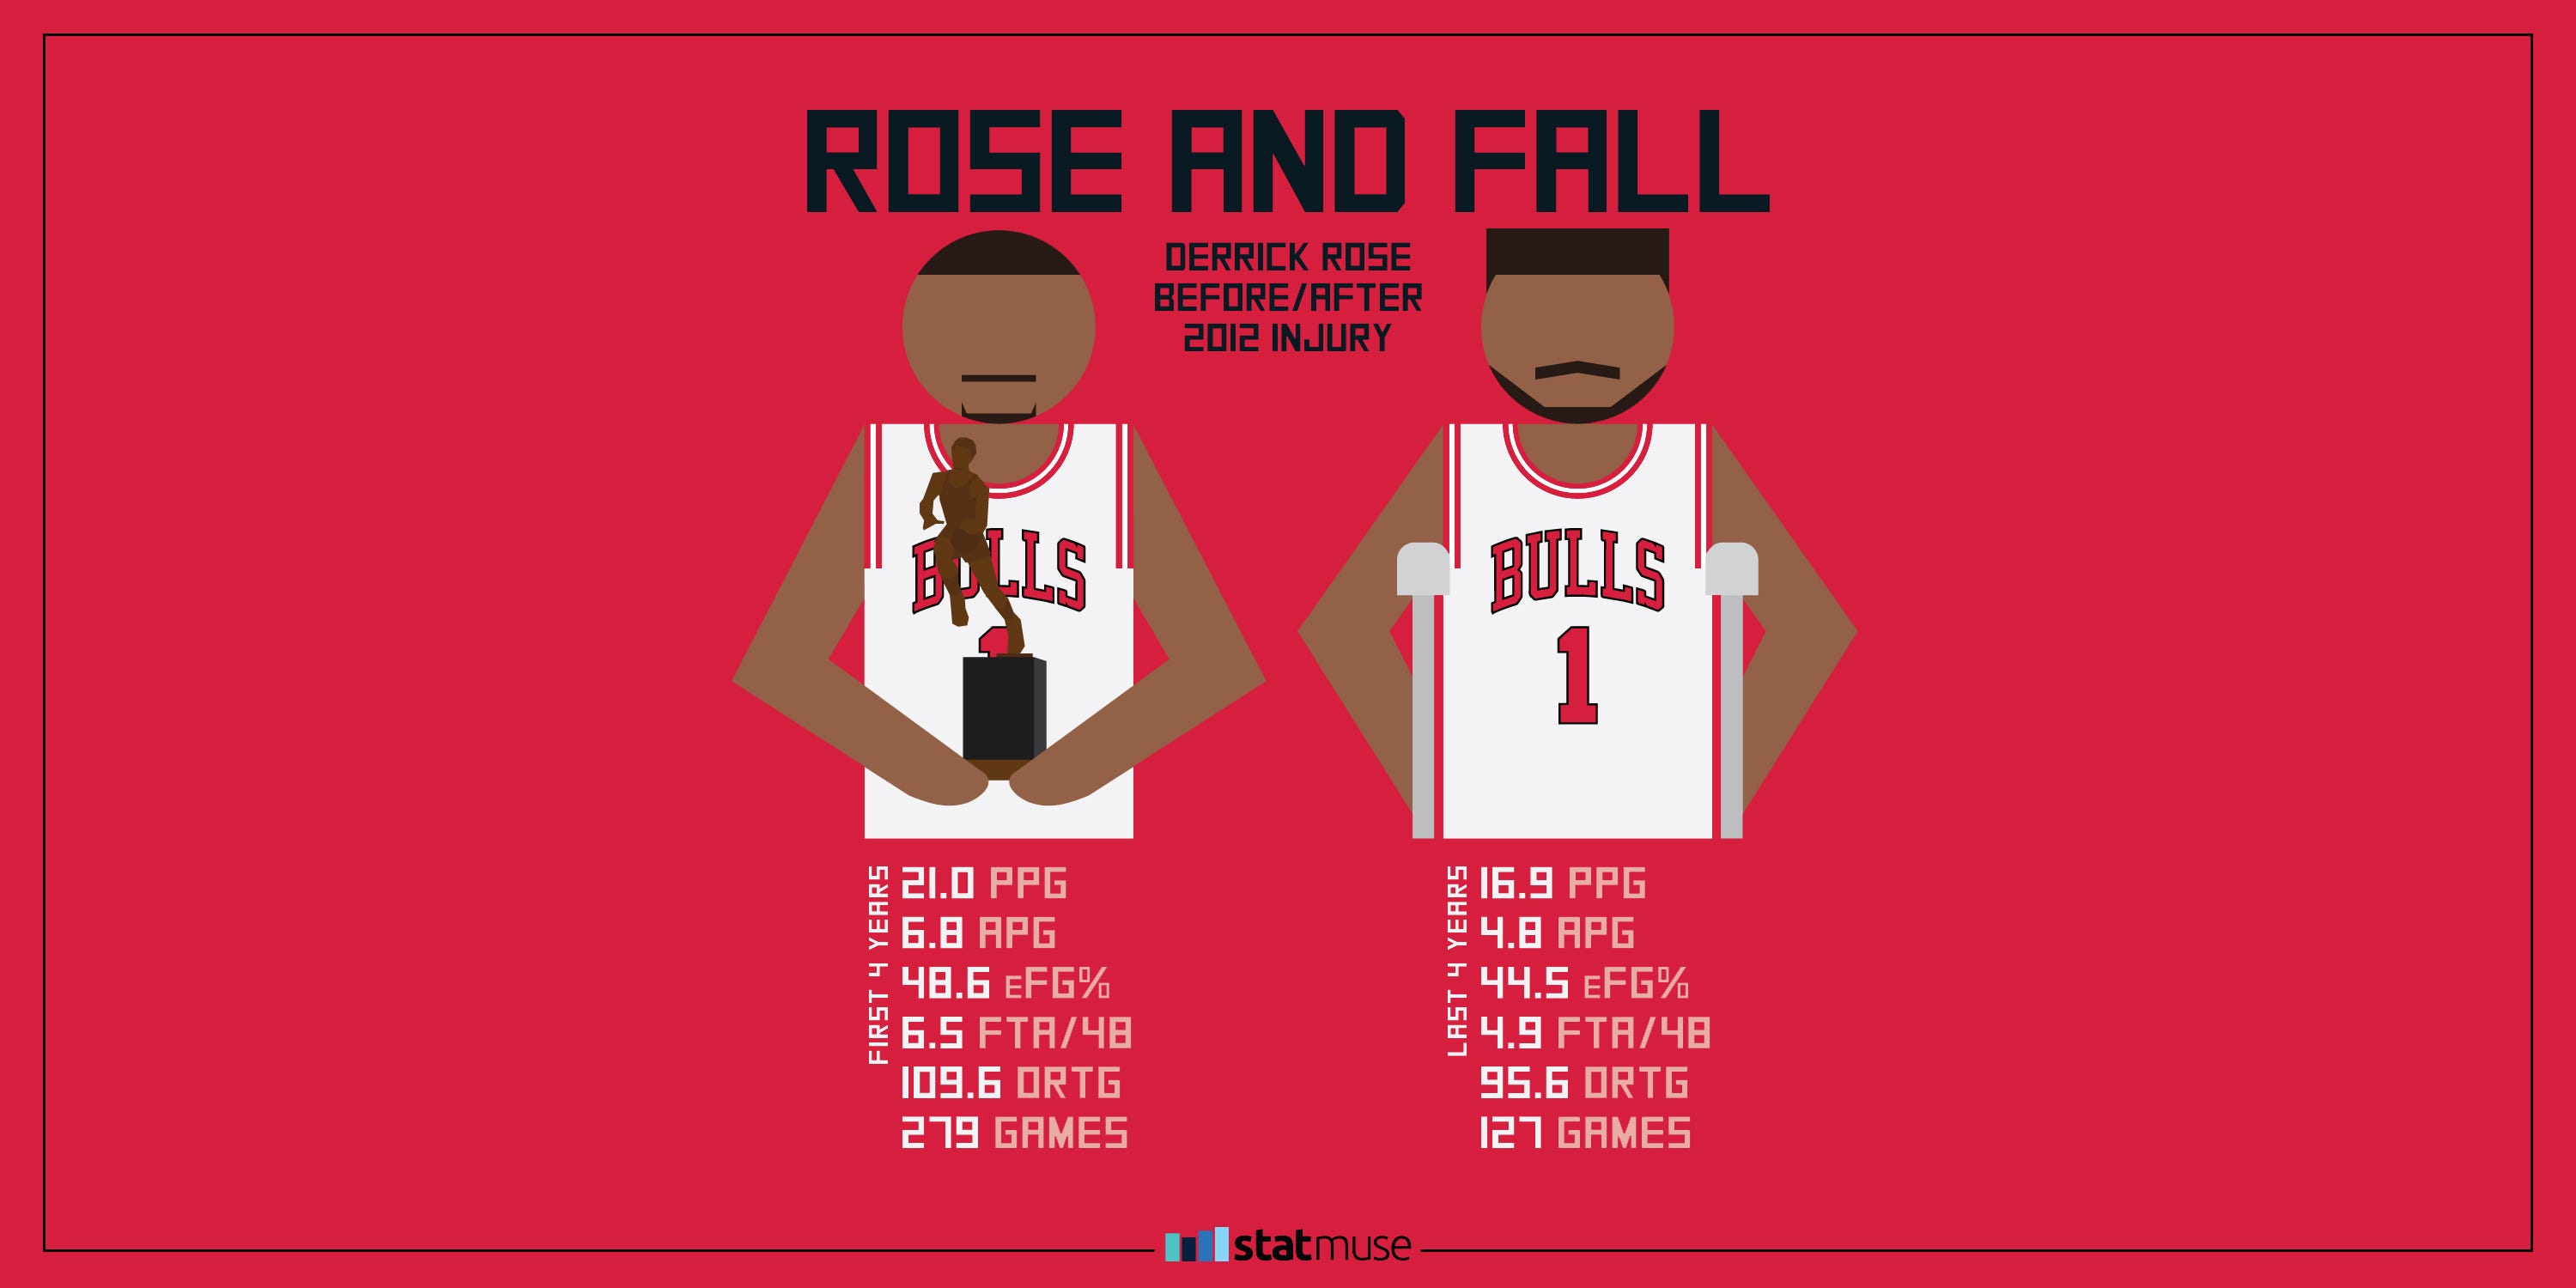 Rose and Fall. Derrick Rose's Stats 